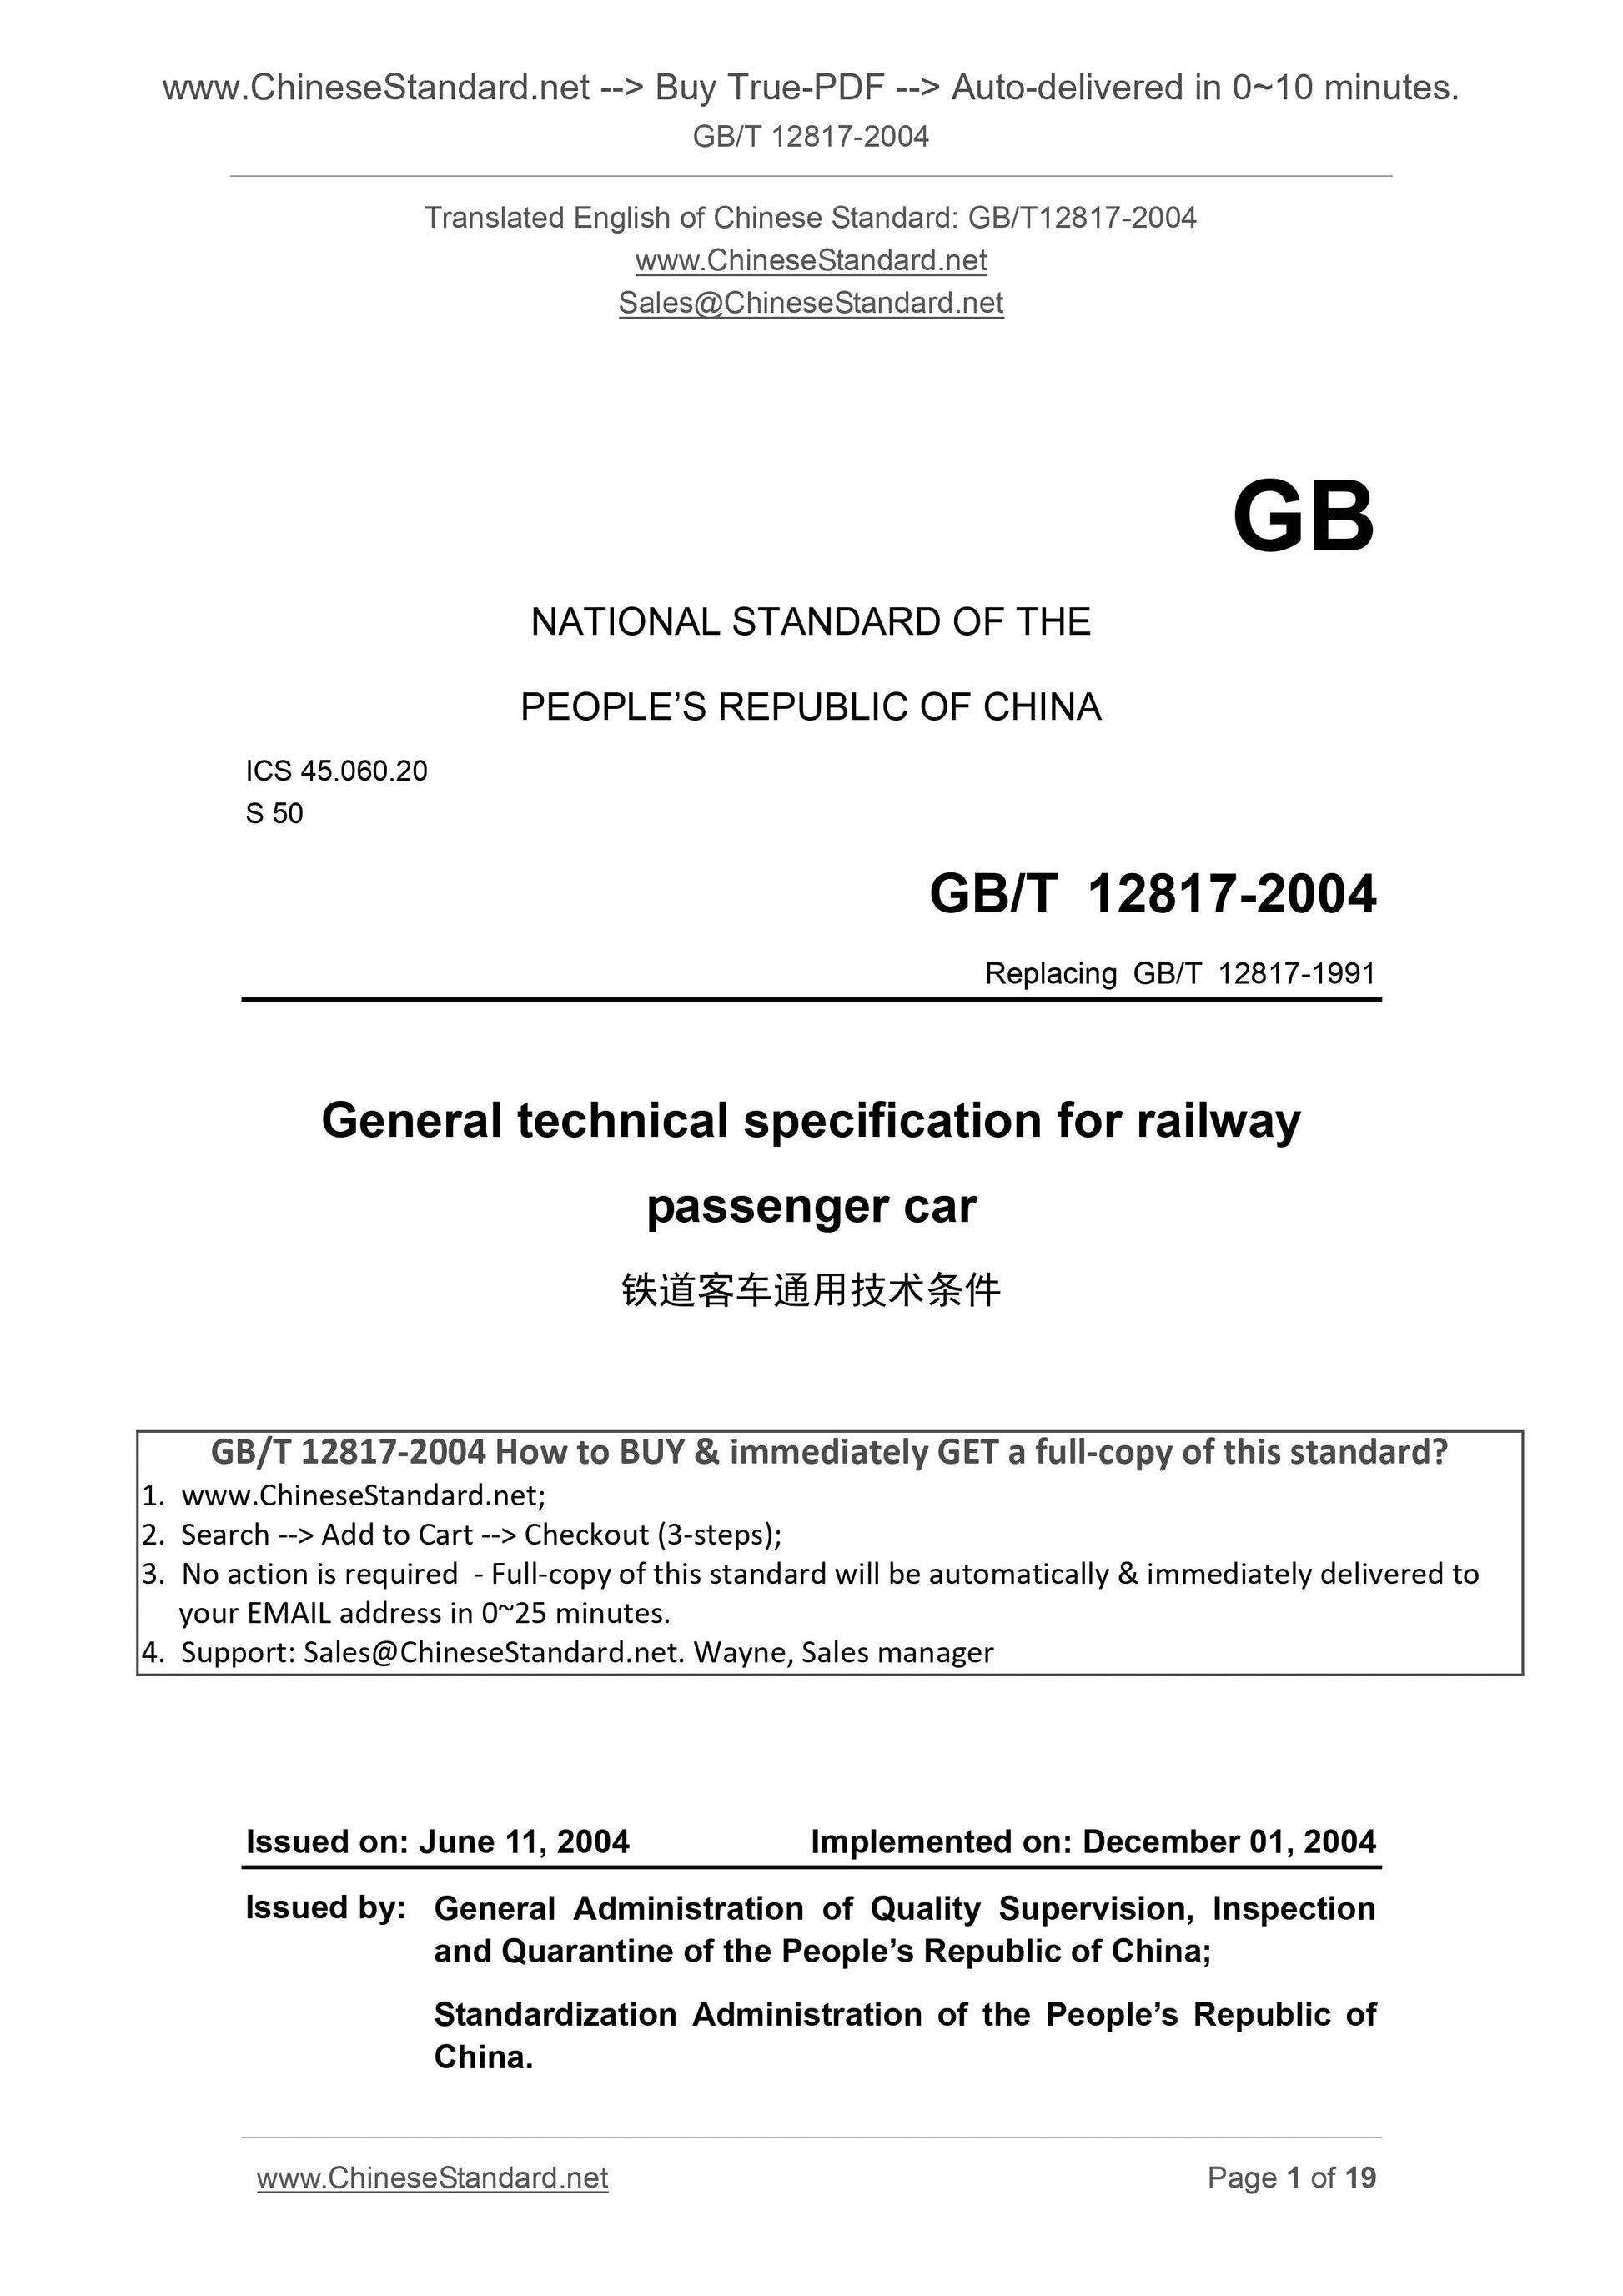 GB/T 12817-2004 Page 1